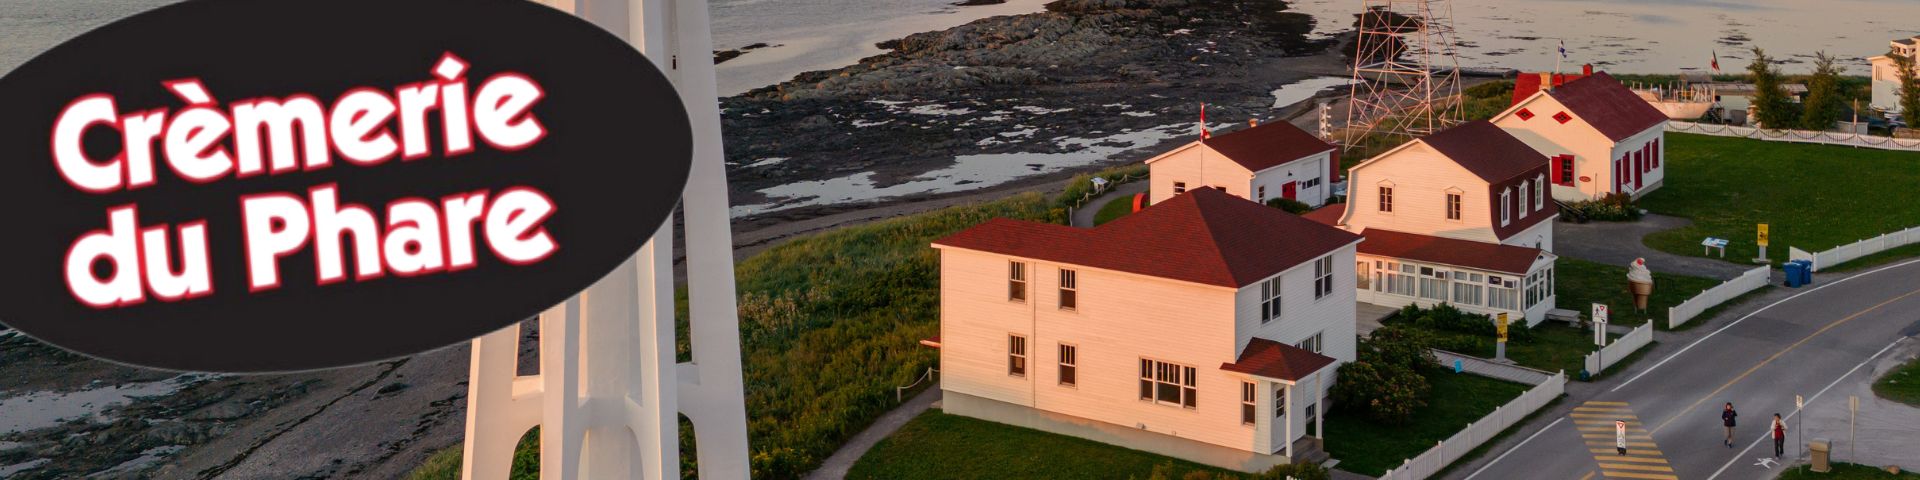 Aerial view of a lighthouse and its dwellings at sunset.